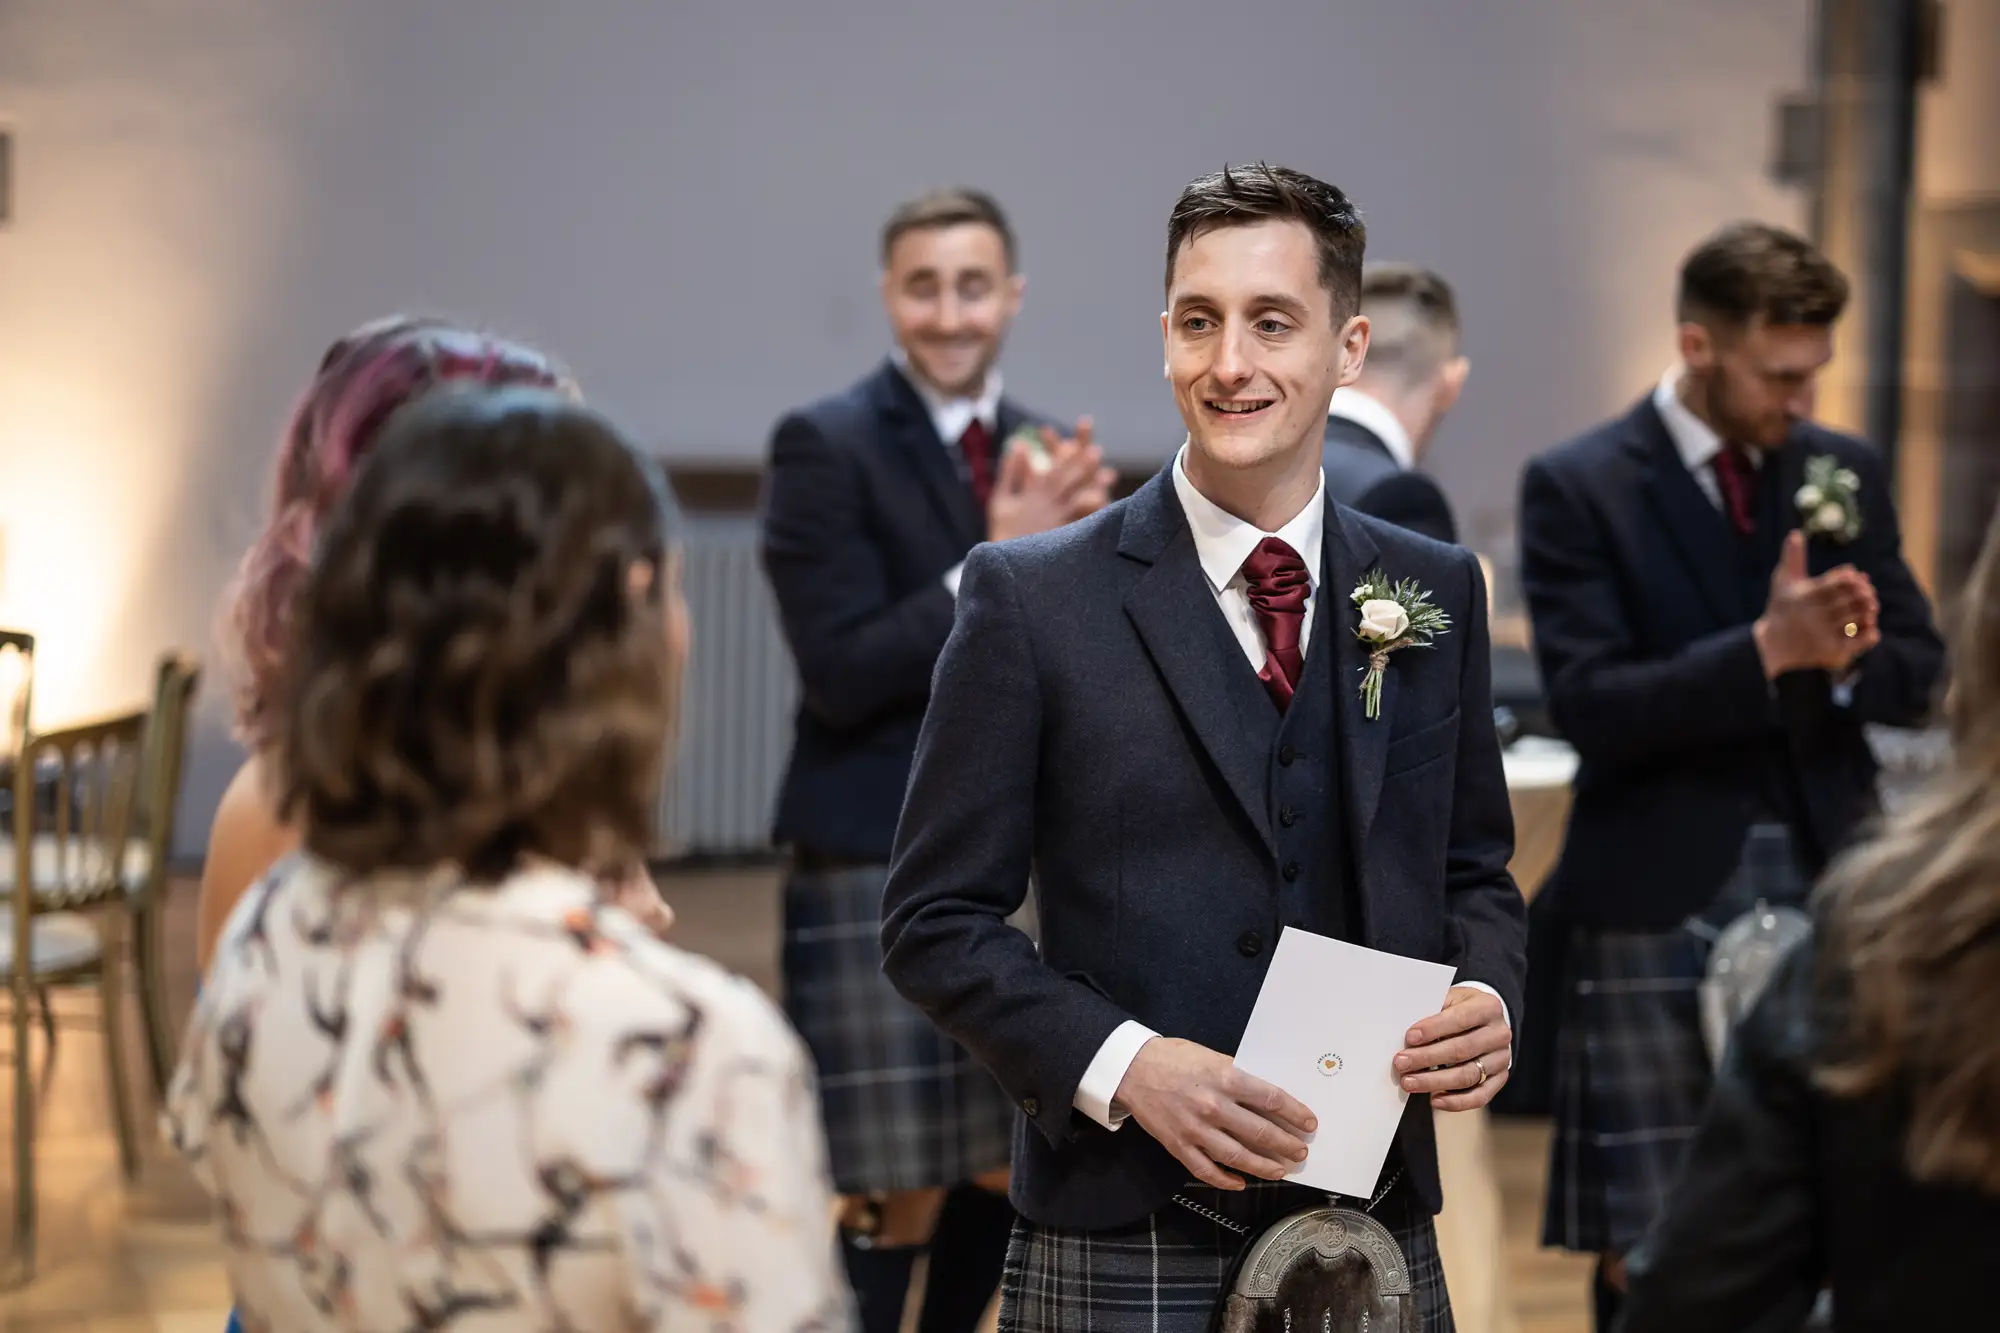 A groom in a kilt smiles at a bride, holding a document, with applauding guests in the background at a wedding ceremony.